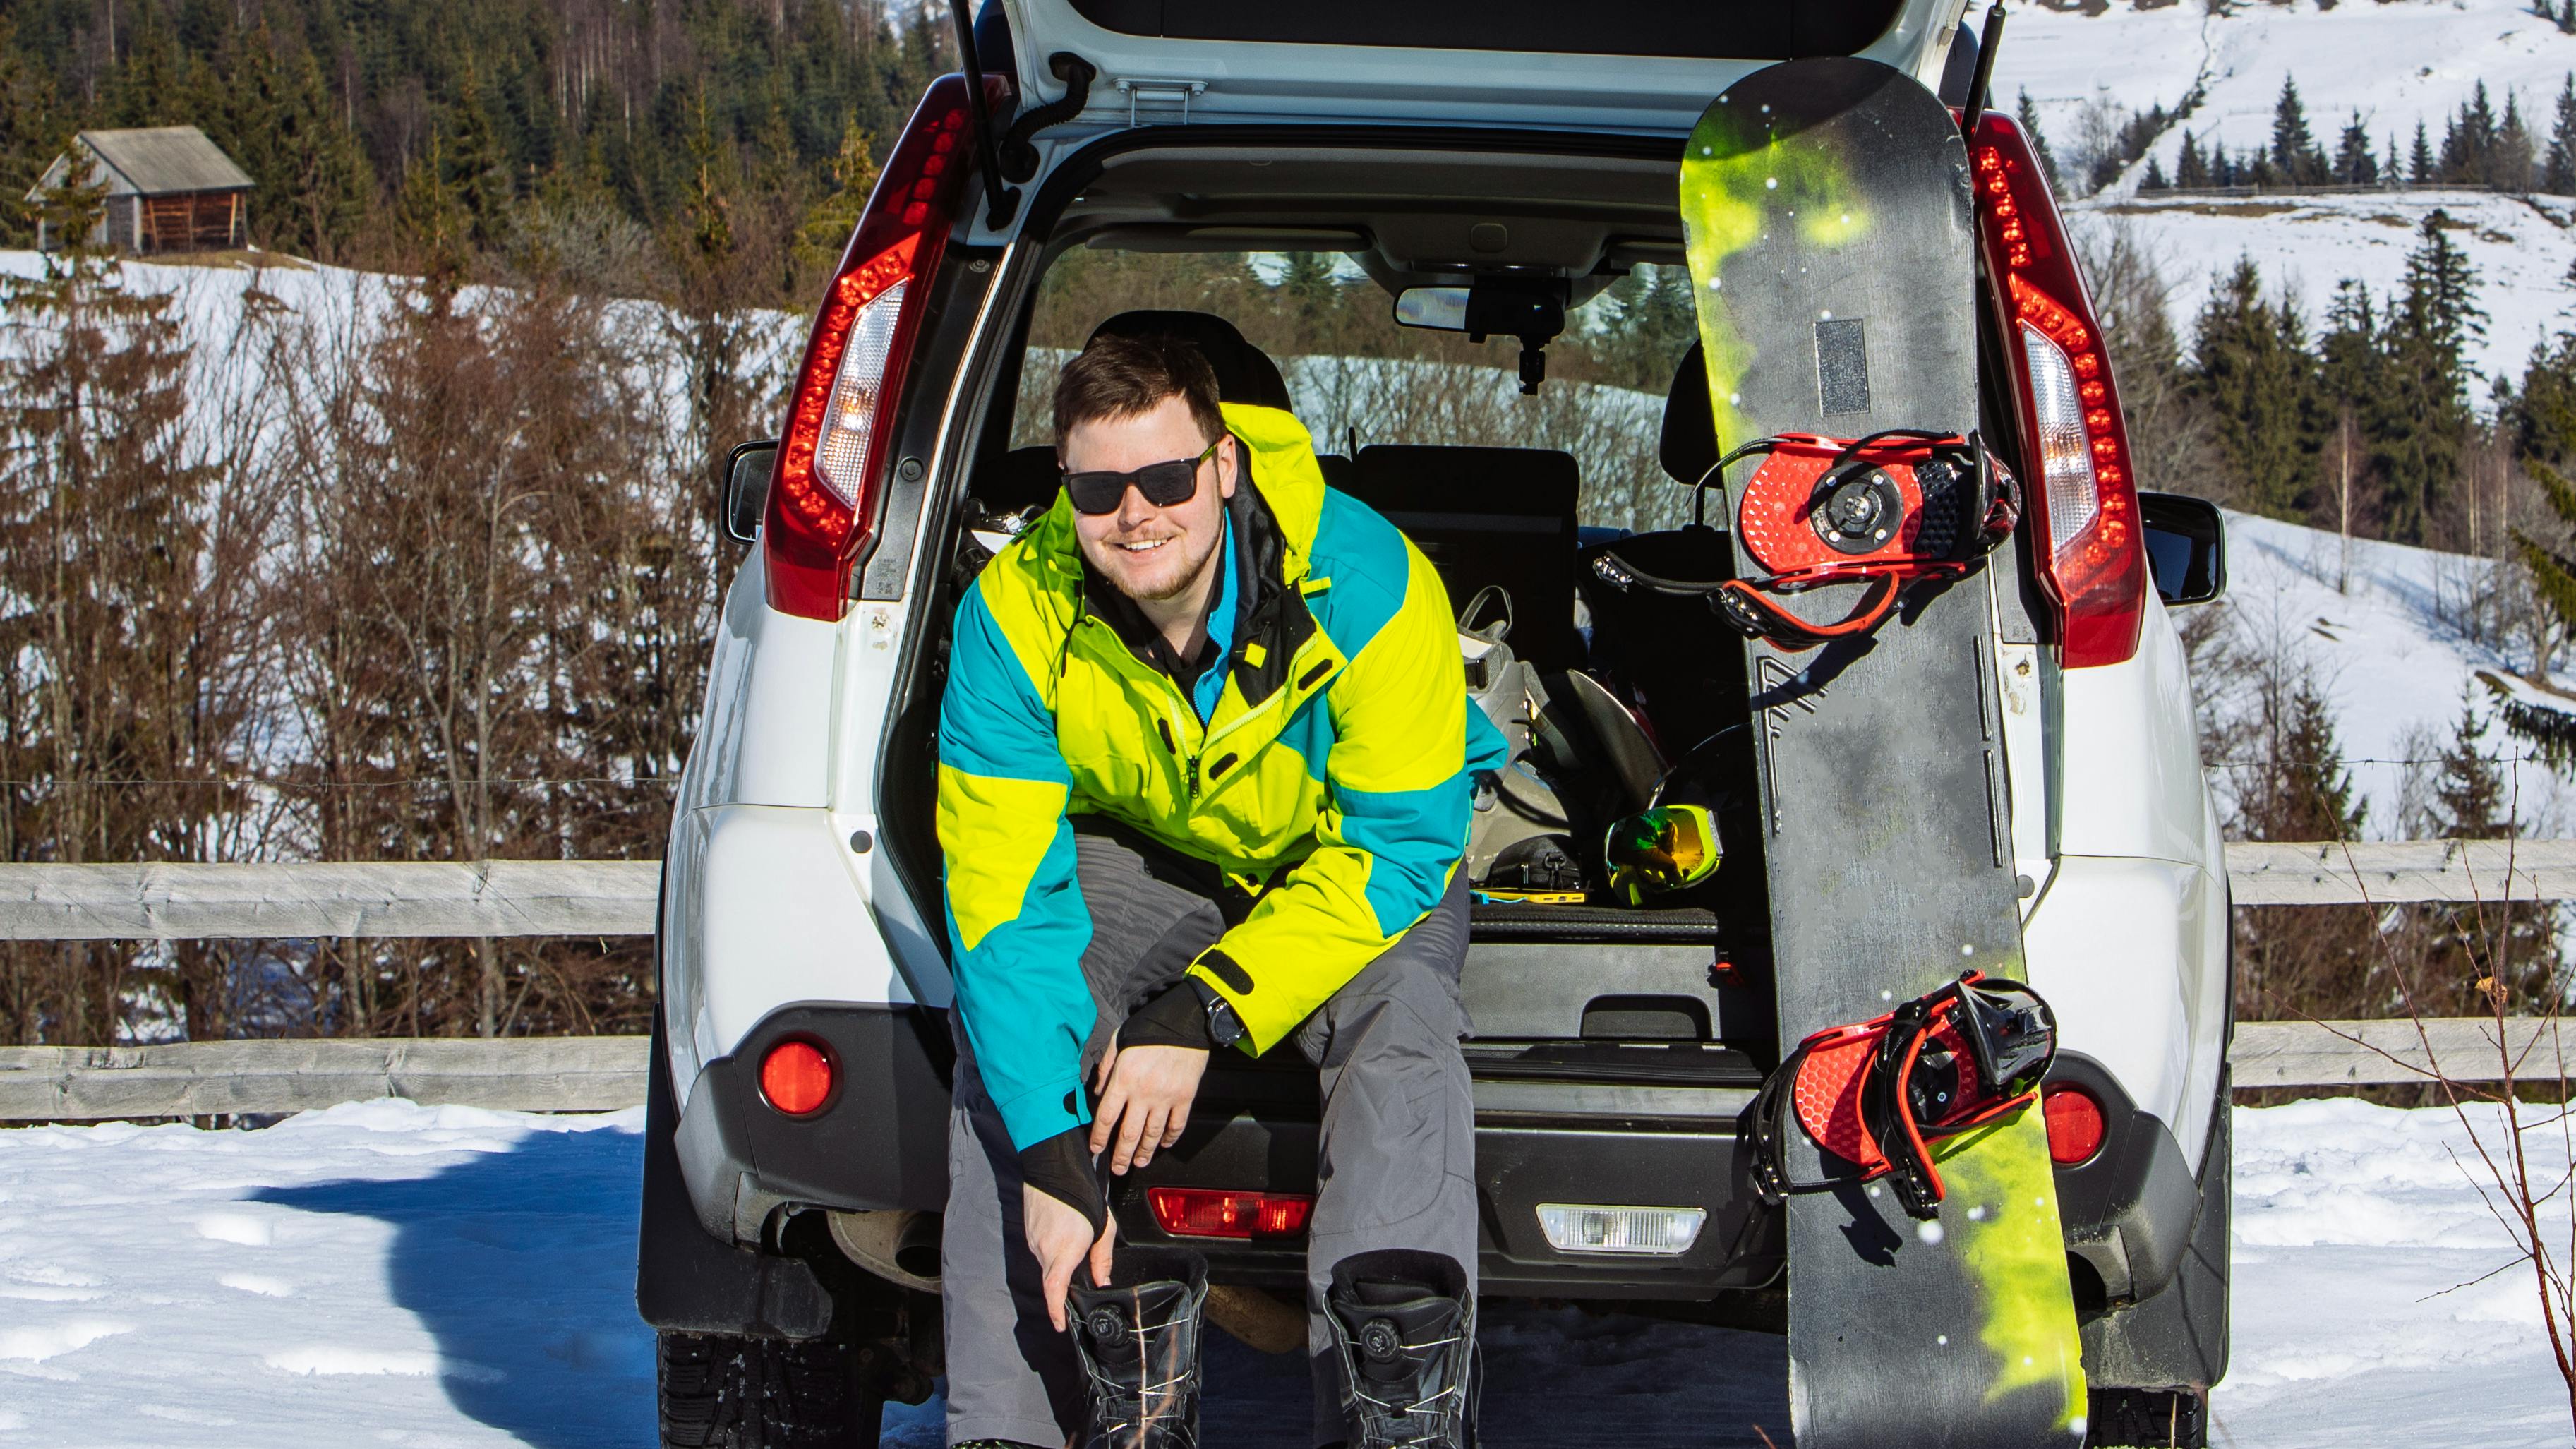 A man is sitting in the back of his car as he smiles at the camera. There is a snowboard sitting in the back of his car with him and he is putting snowboard boots on. The parking lot is snowy and there are snowy hills behind him. 